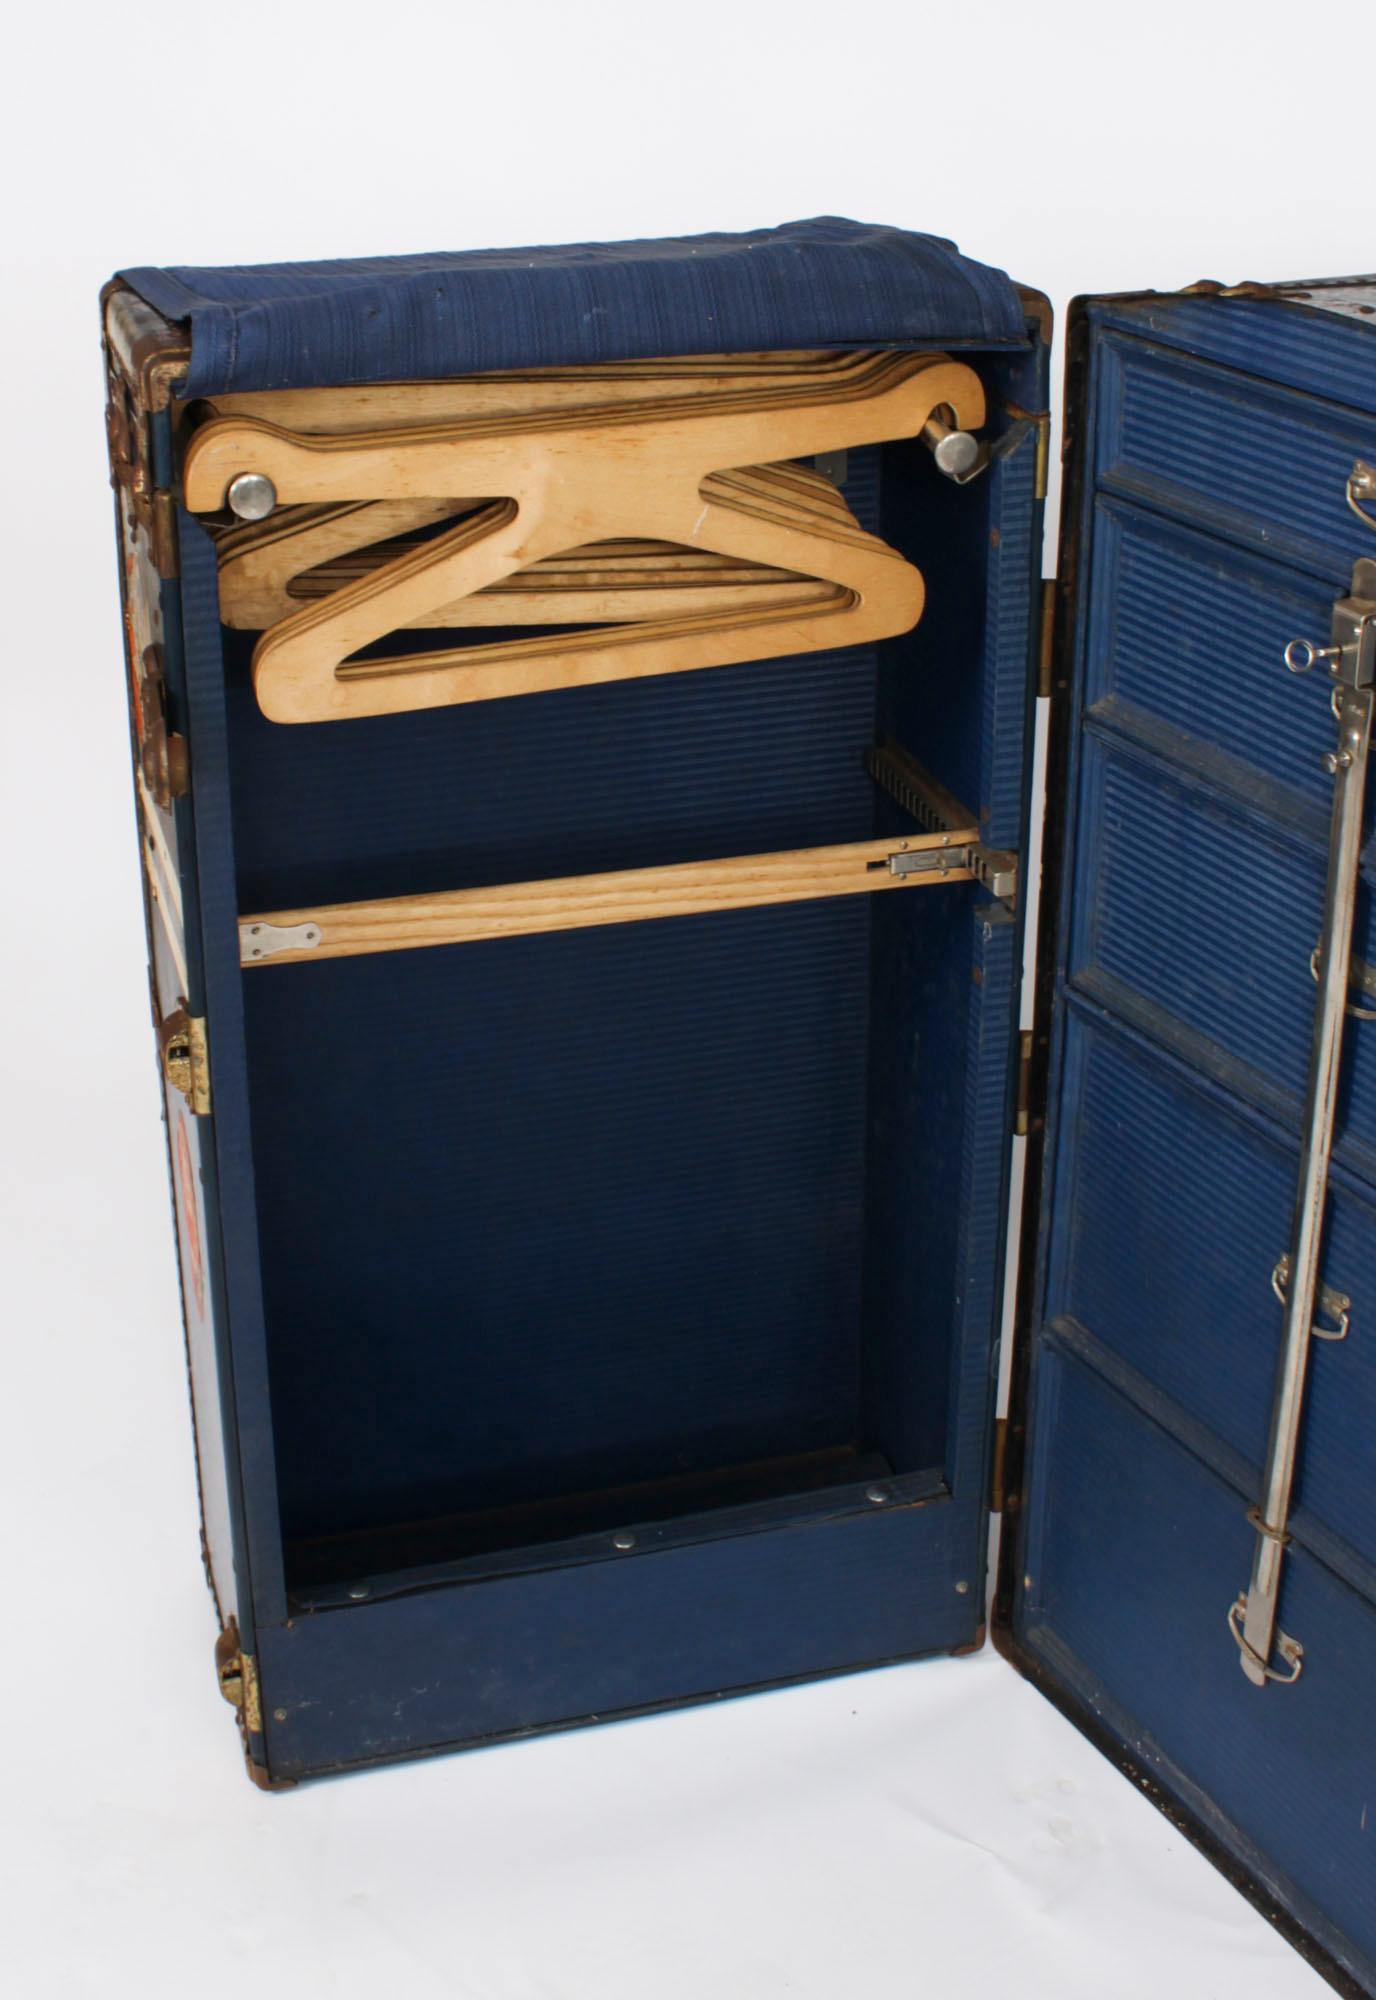 Antique Wardrobe Steamers Trunk Luggage C1930 For Sale 1